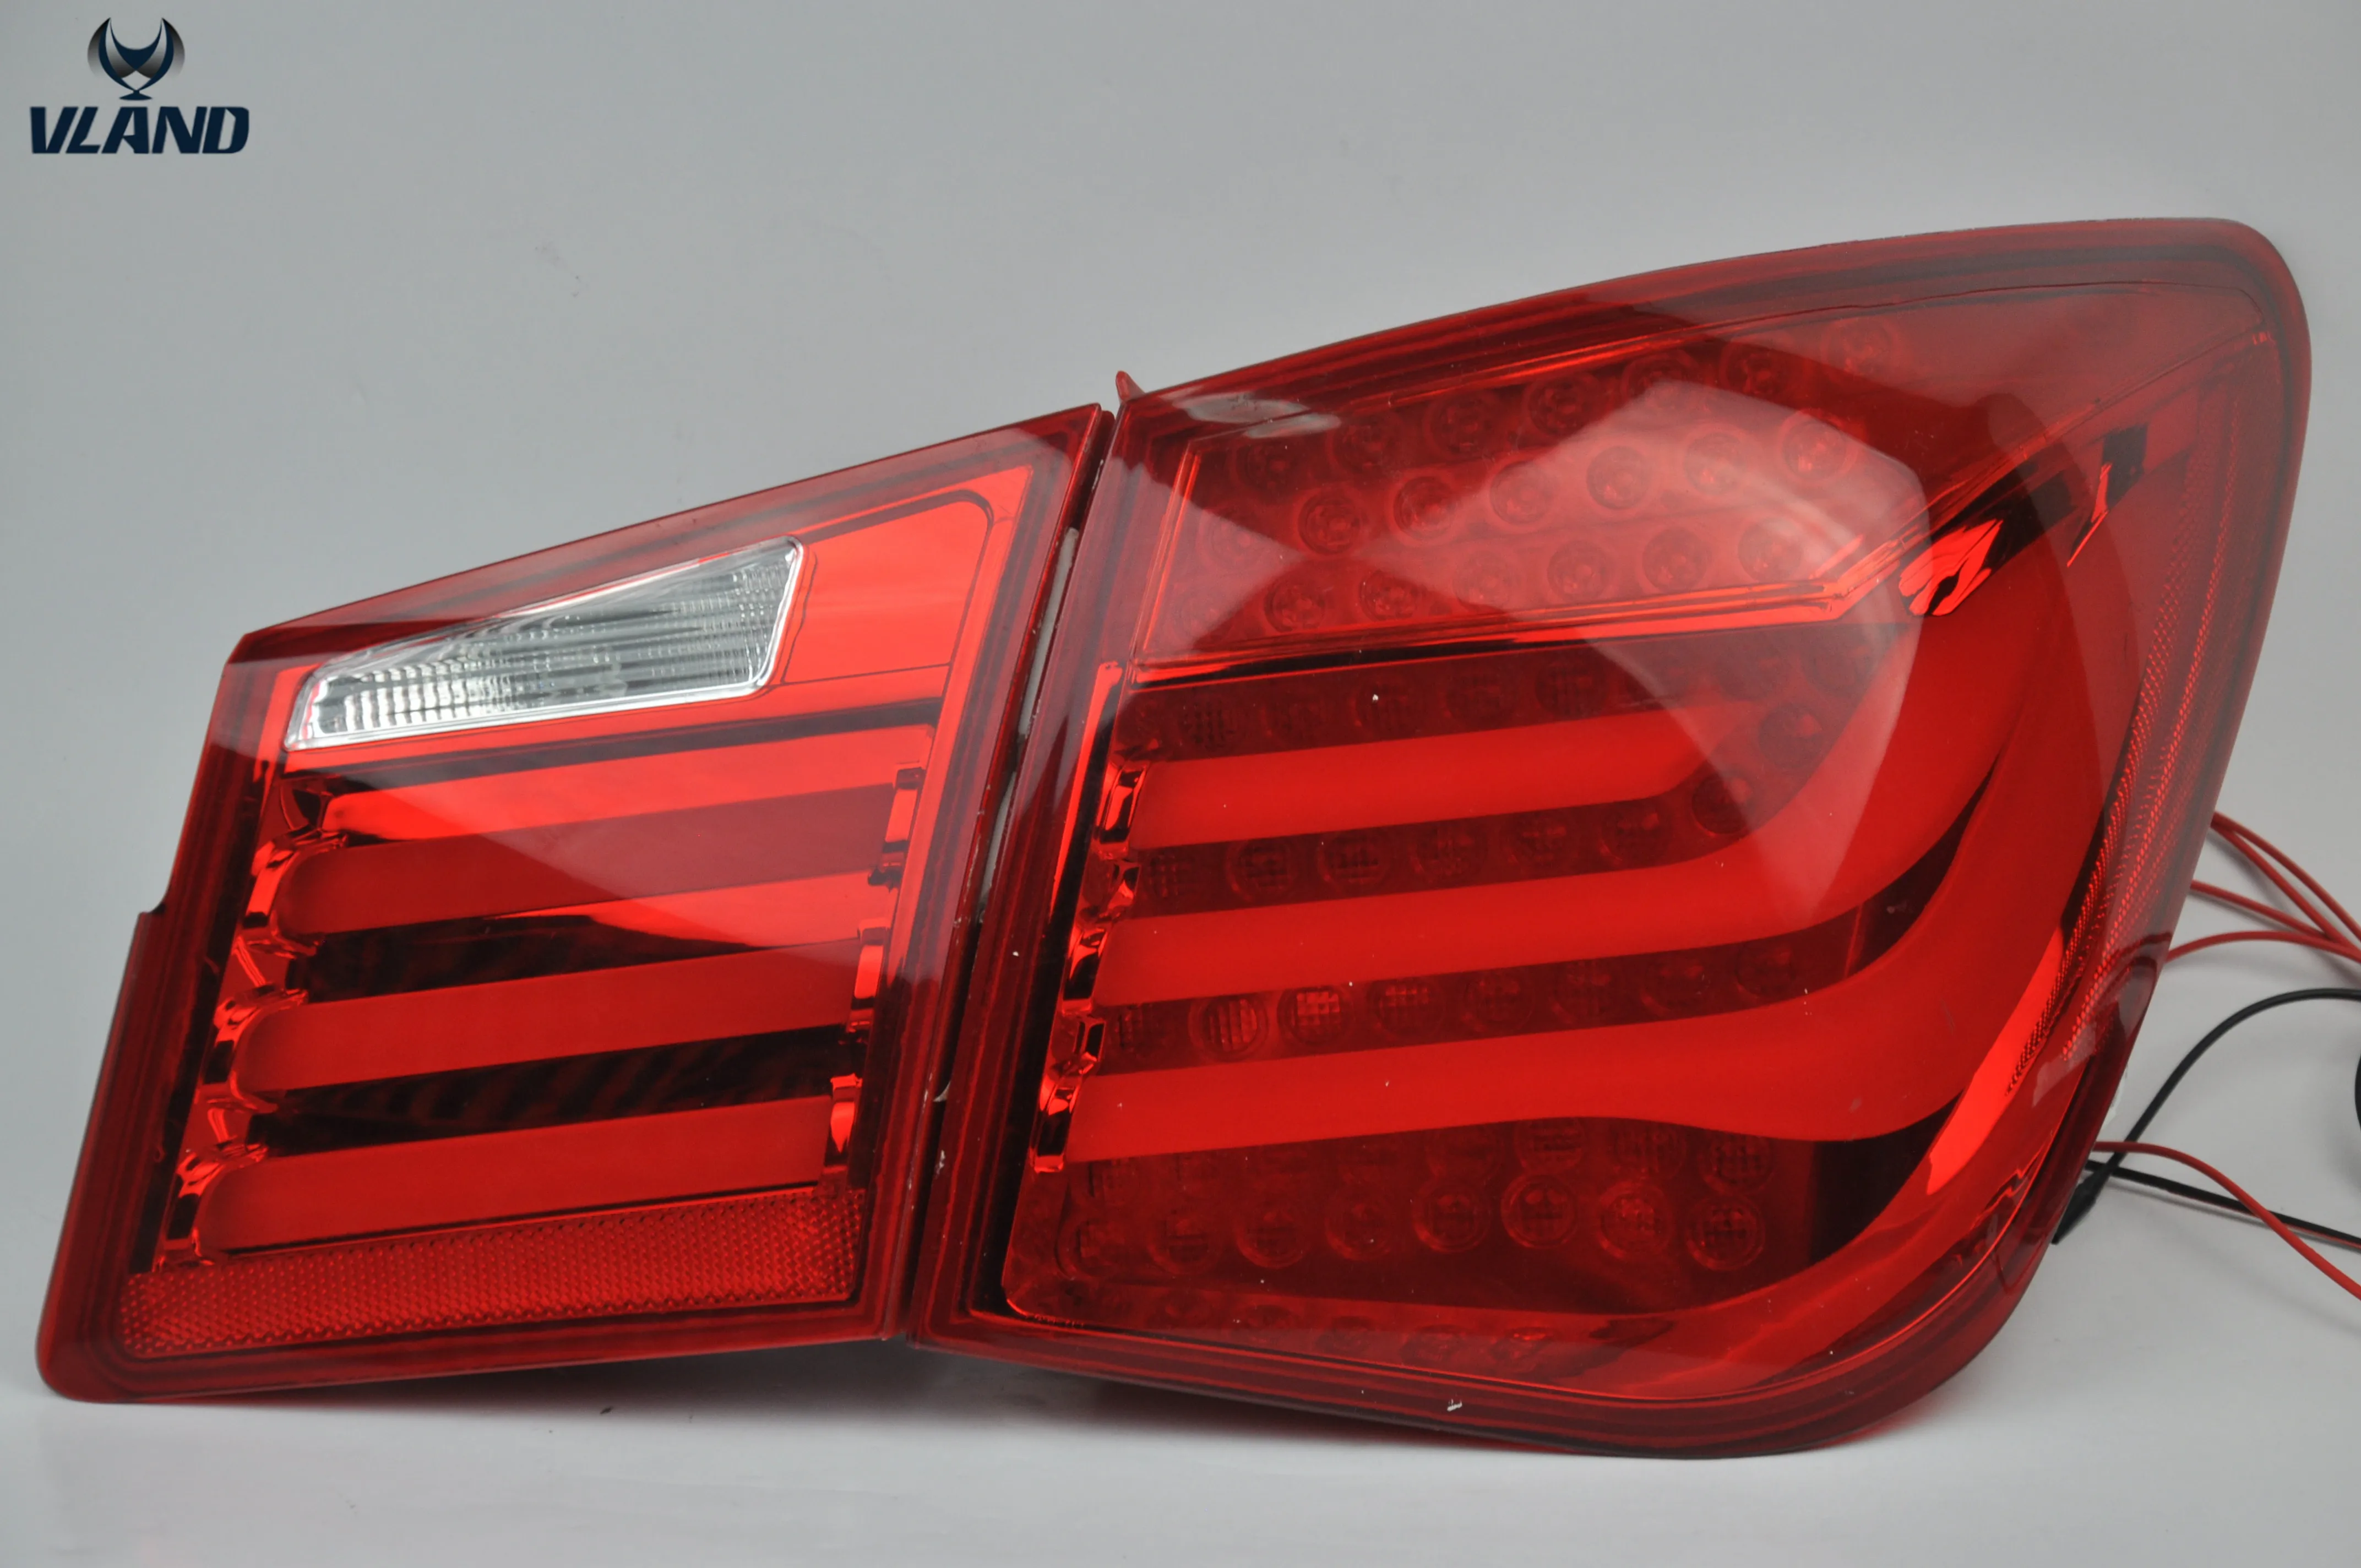 VLAND Factory accessory cruze car tail light for Chevrolet Cruze taillight for 2010-2014 with LED DRL